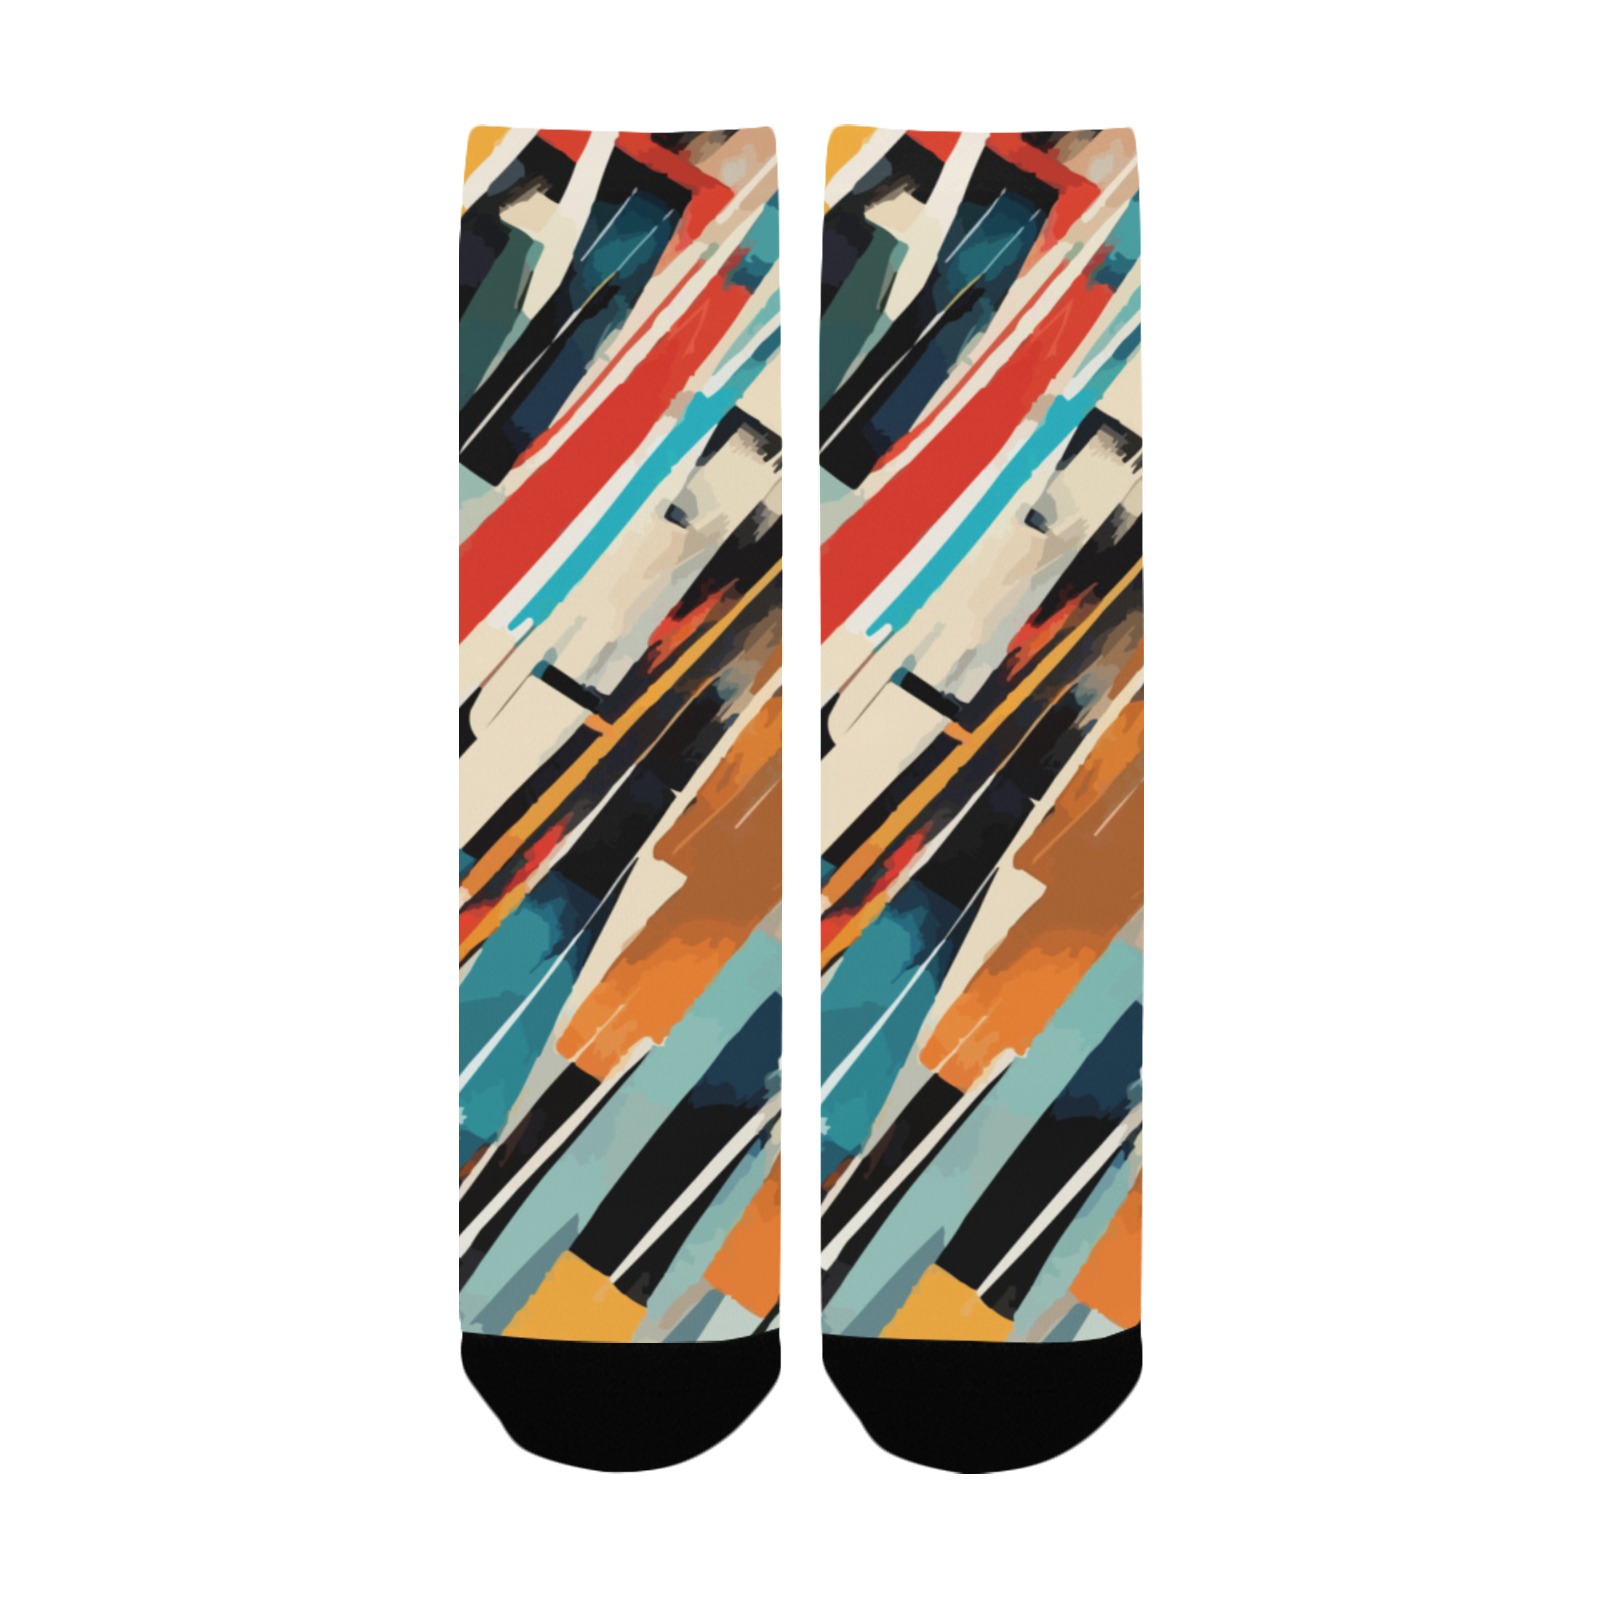 Classy abstract art of shapeless forms and colors Custom Socks for Women